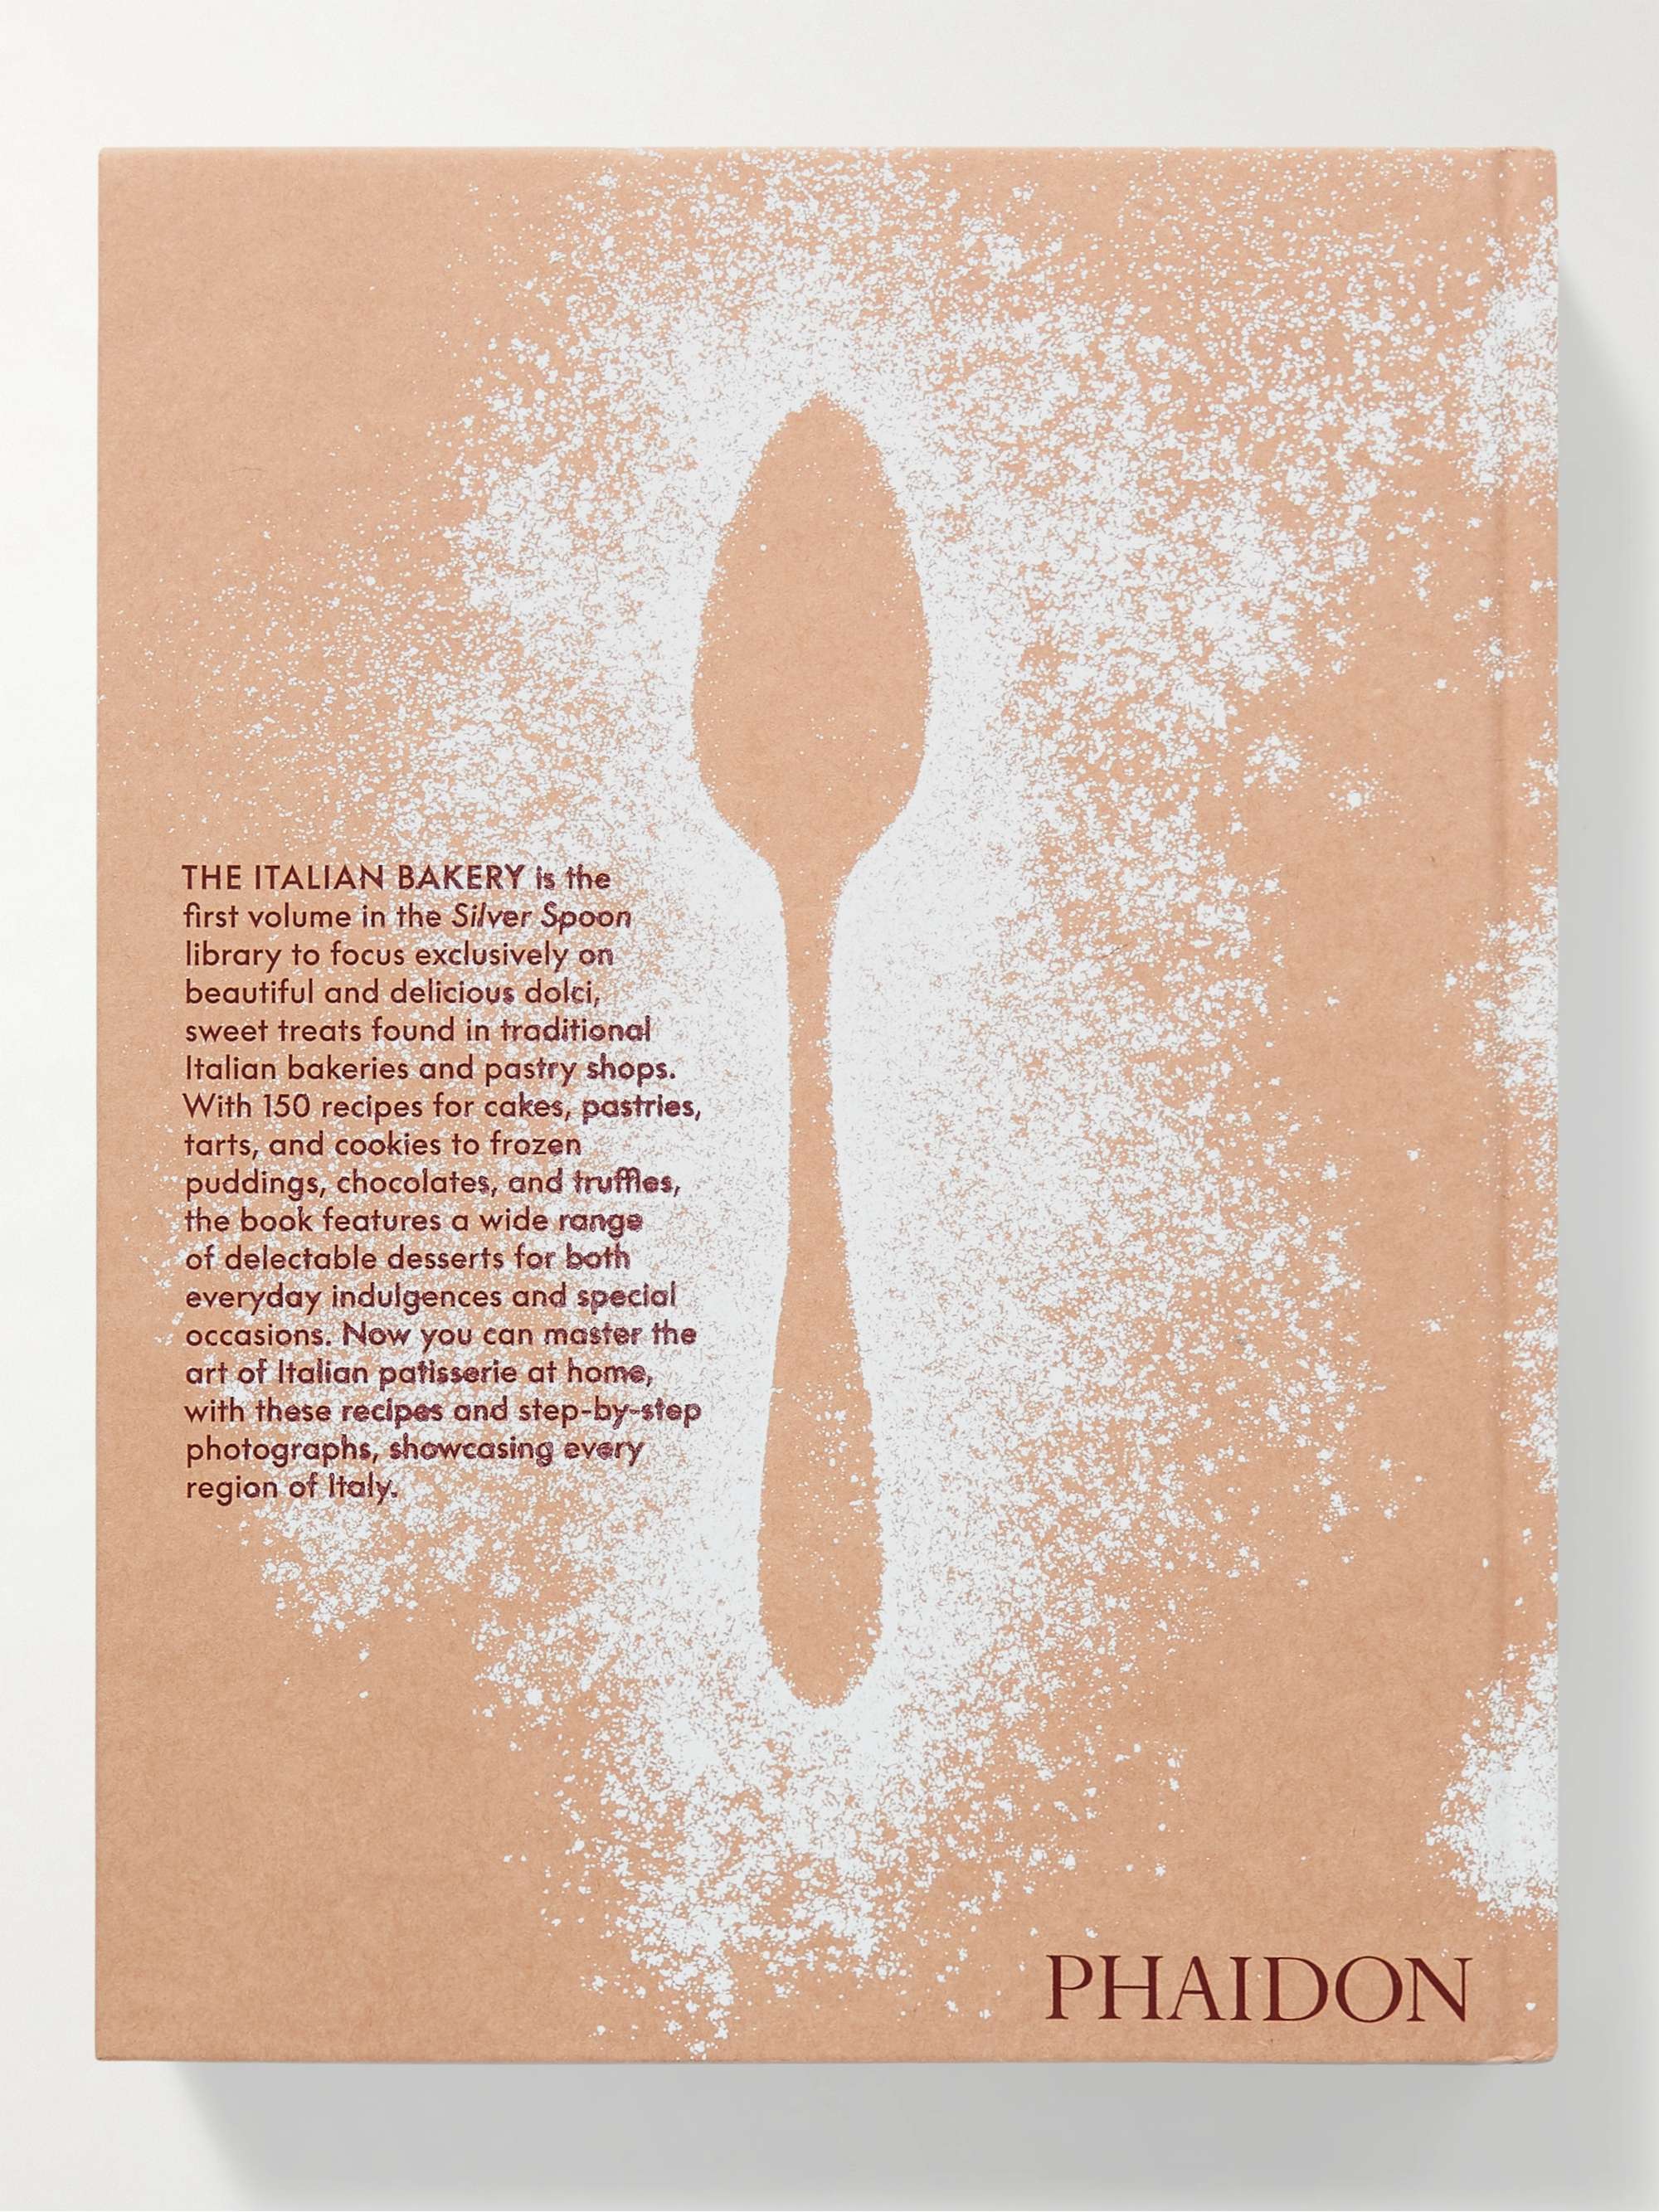 PHAIDON The Italian Bakery: Step-by-Step Recipes with The Silver Spoon Hardcover Cookbook